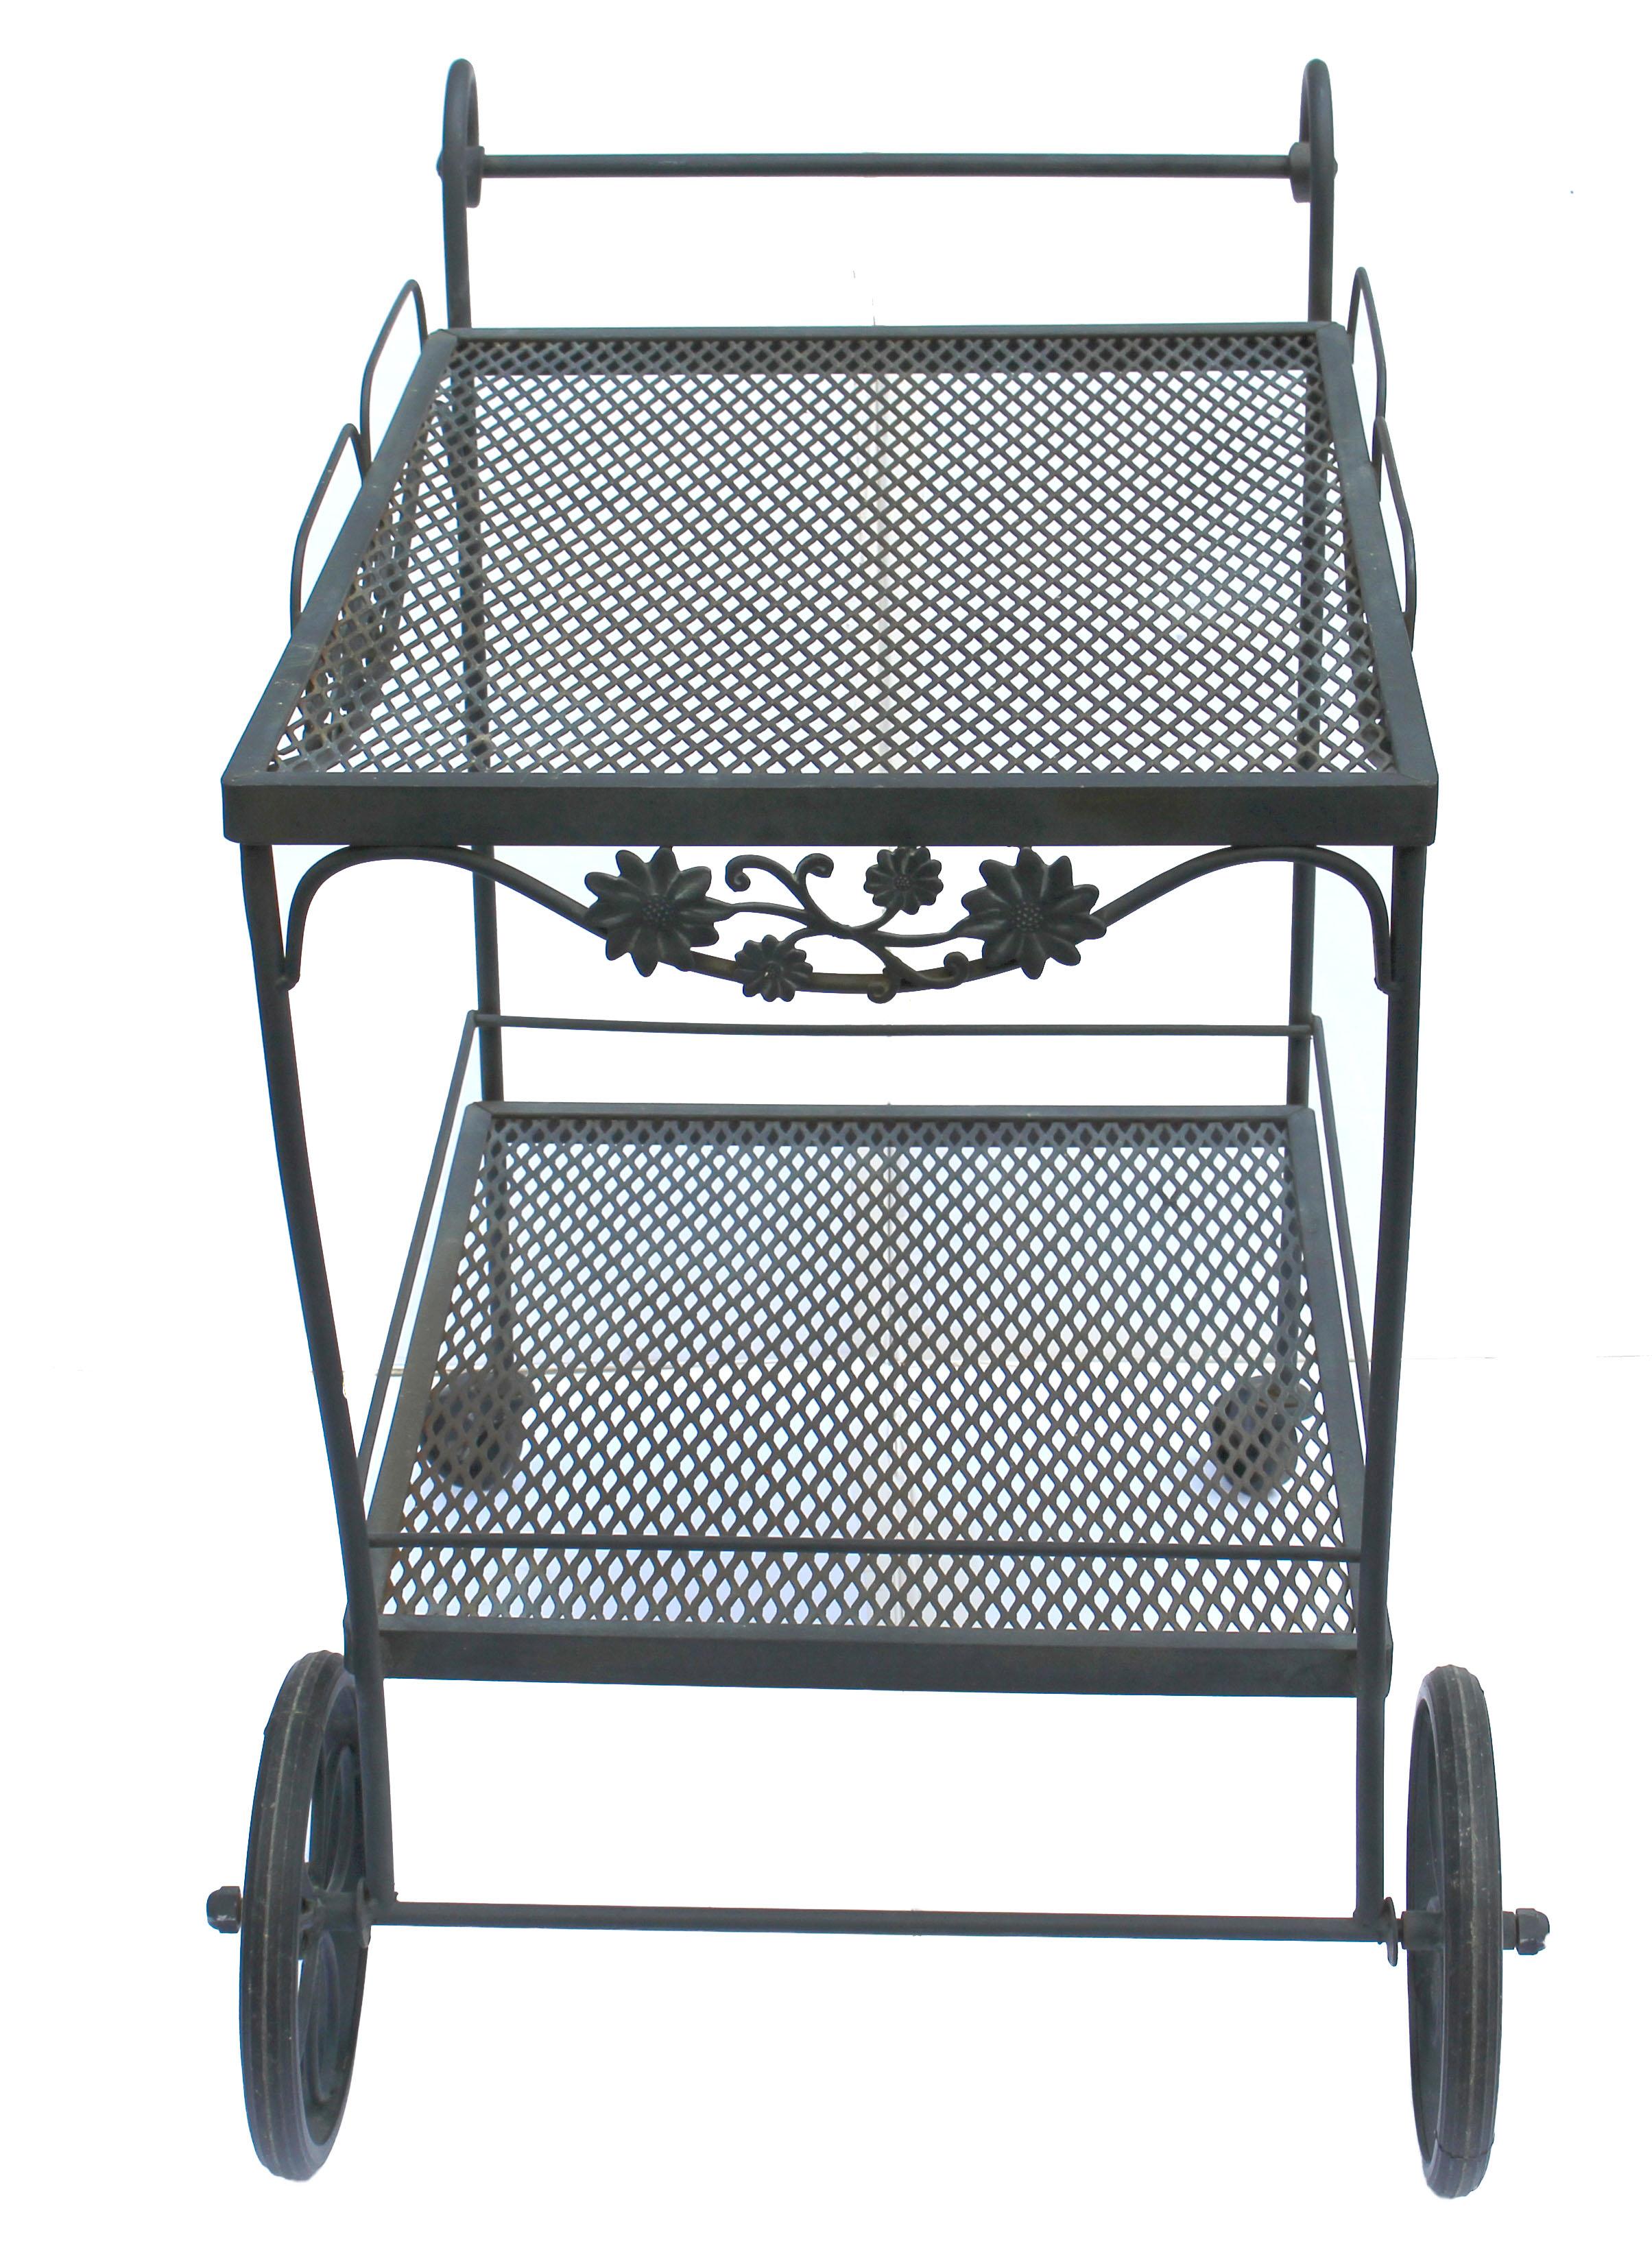 Circa 1980s wrought iron bar cart by Russell Woodard. The 